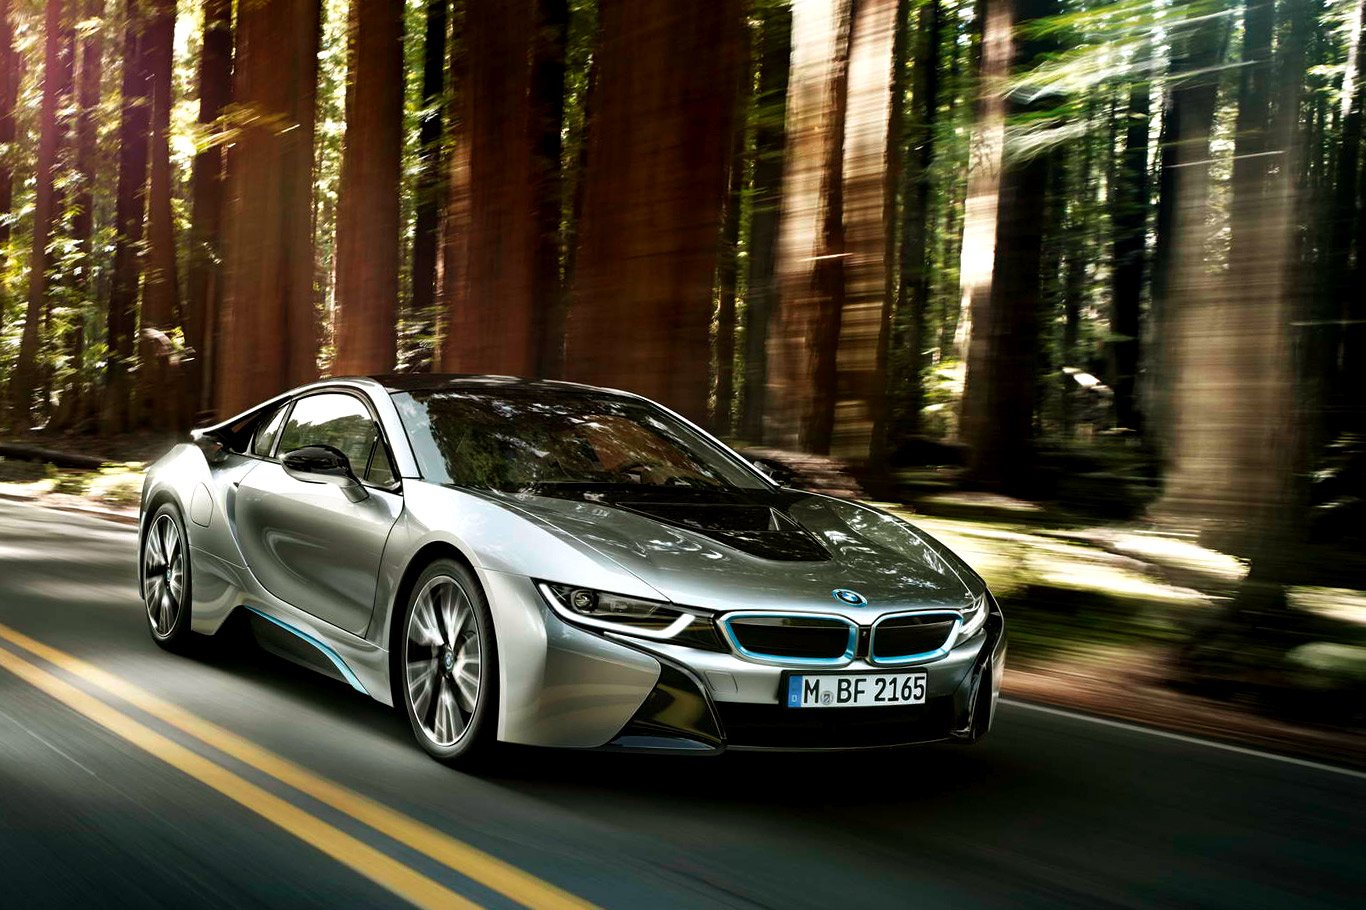 bmw i8 wallpapers 720p hd 4k